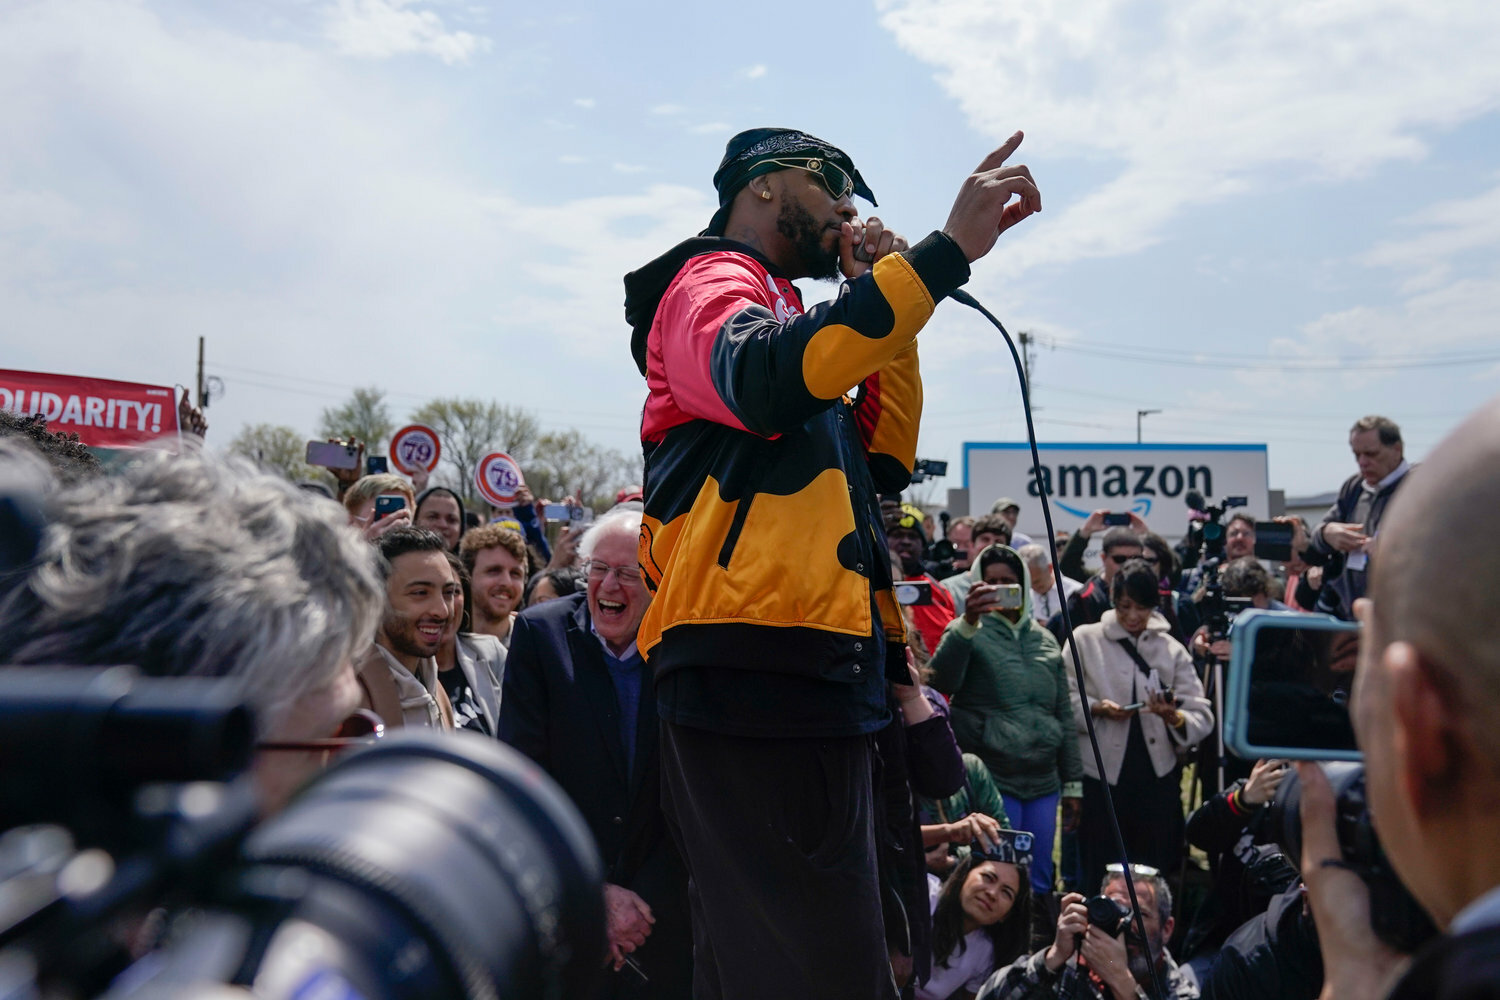 Christian Smalls, president of the Amazon Labor Union, spoke at a rally outside a Staten Island Amazon facility in the aftermath of a hard-won labor victory. Amazon workers cheered their victory and danced in celebration but their cheer is being tested by a company that will drive a hard bargain in contract negotiations.